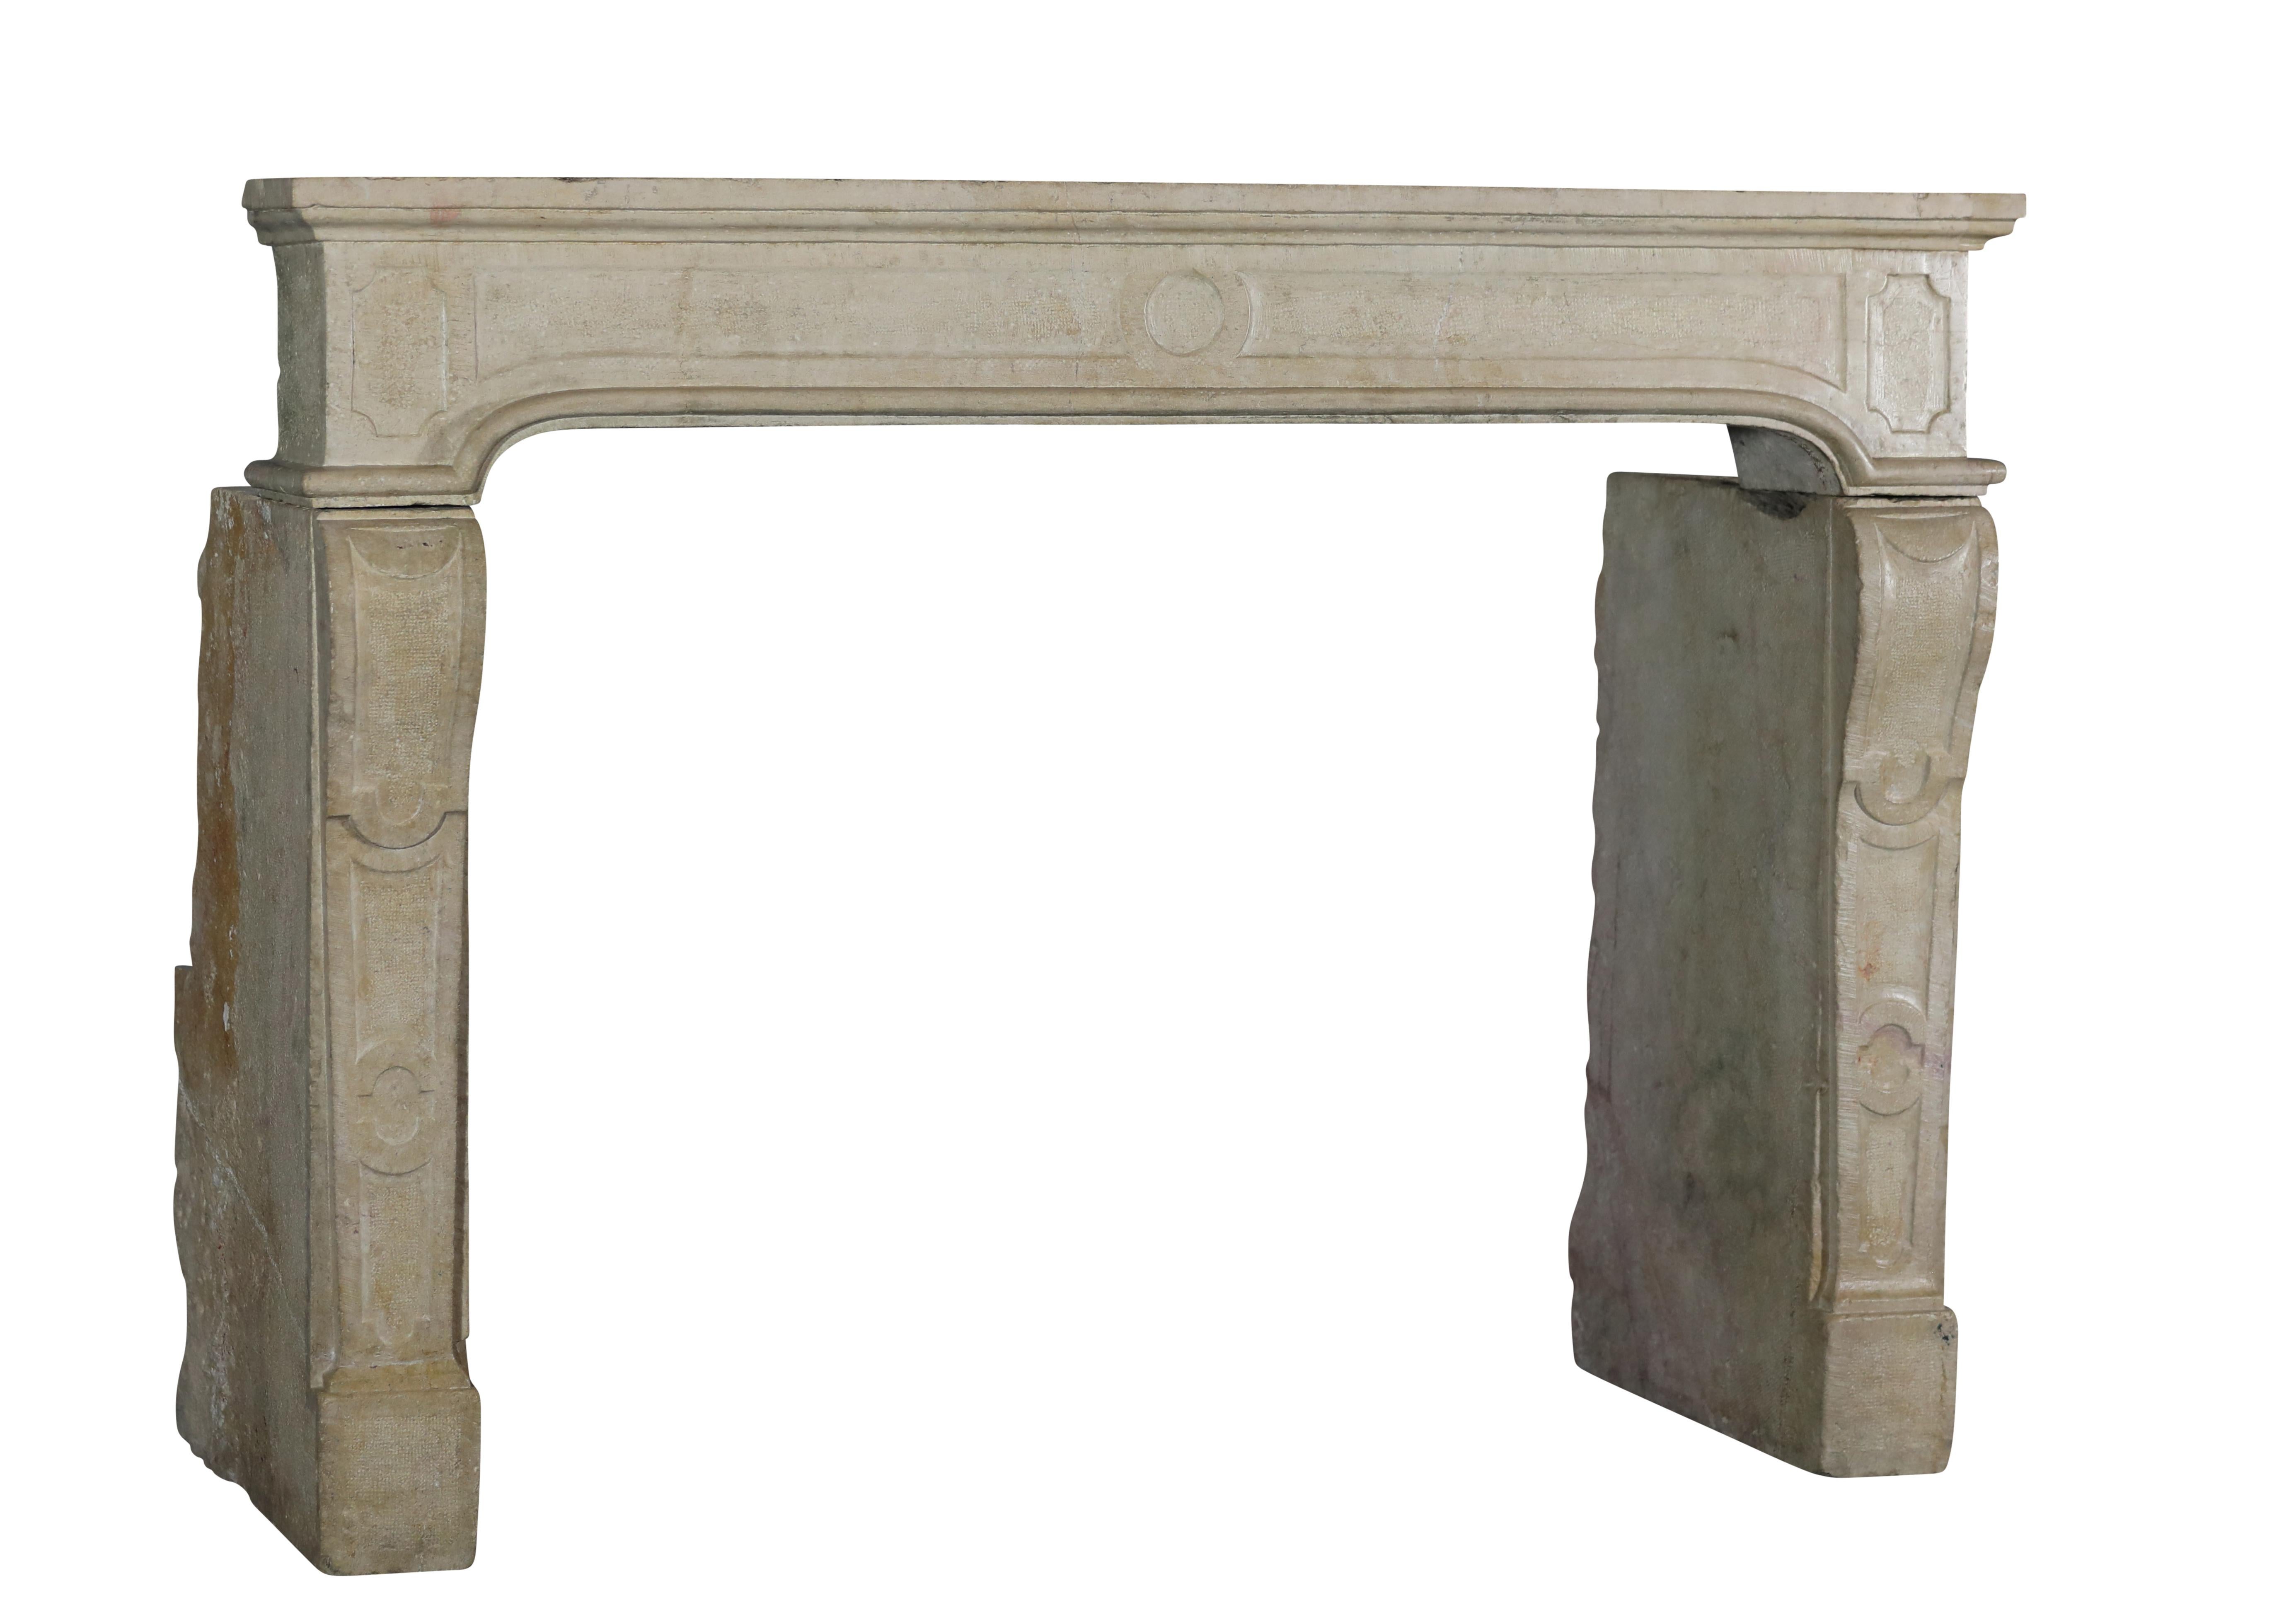 Strong French Beige hard limestone decorative fireplace.
Easy on the touch this French 18th century period fireplace reflects the light into the room.
A great mantle for great timeless fires.
This strong piece has some small restorations and is